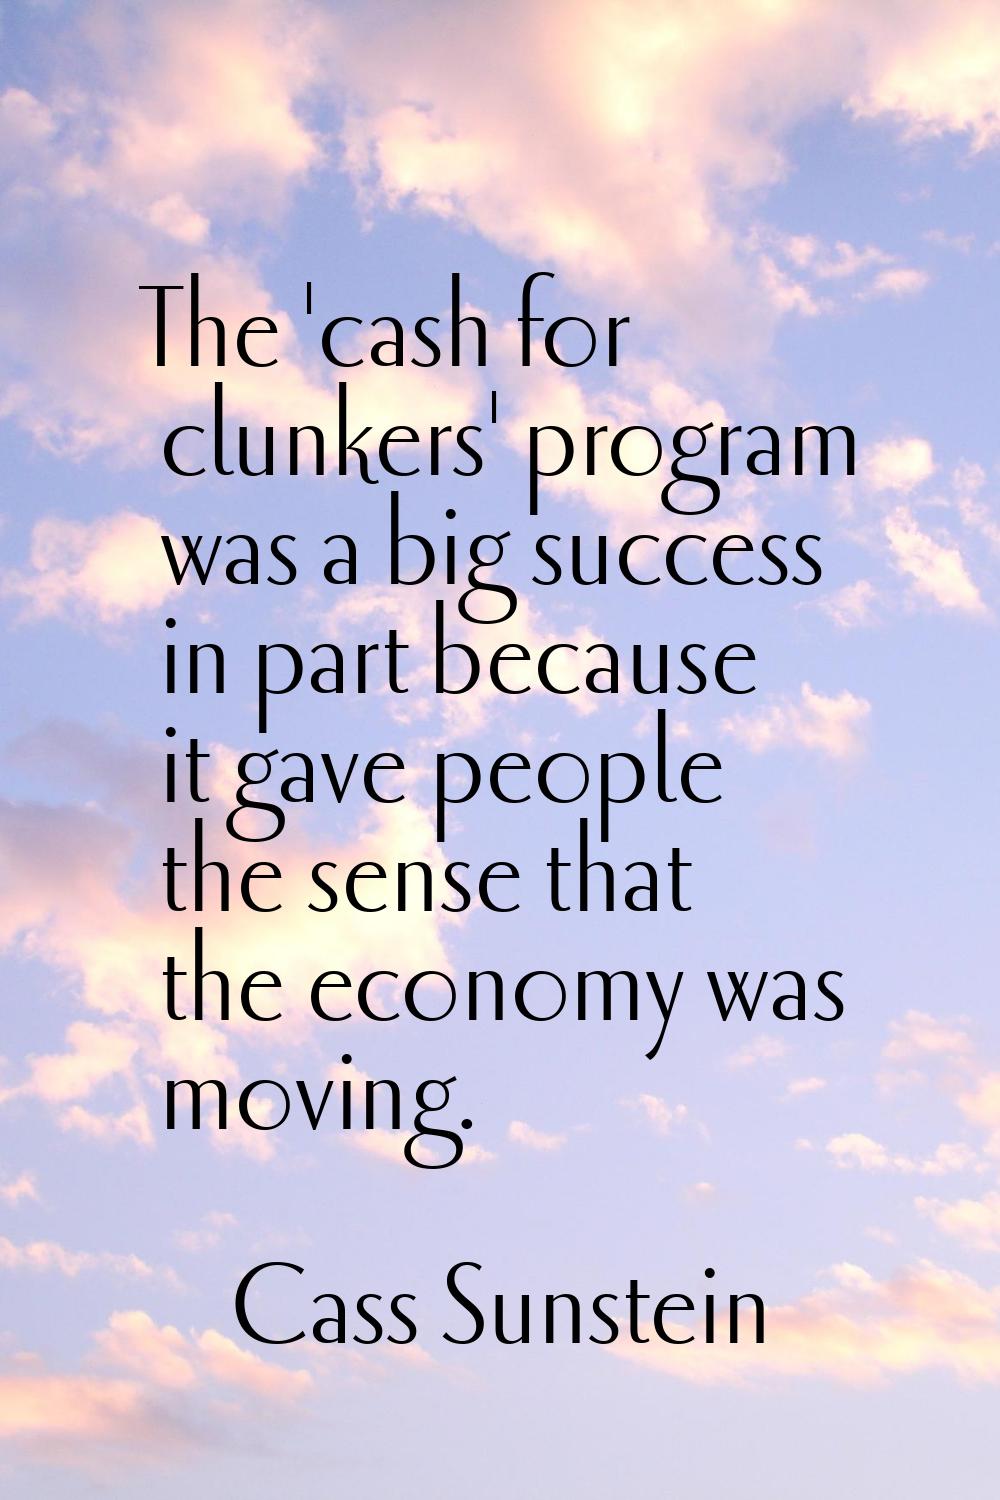 The 'cash for clunkers' program was a big success in part because it gave people the sense that the